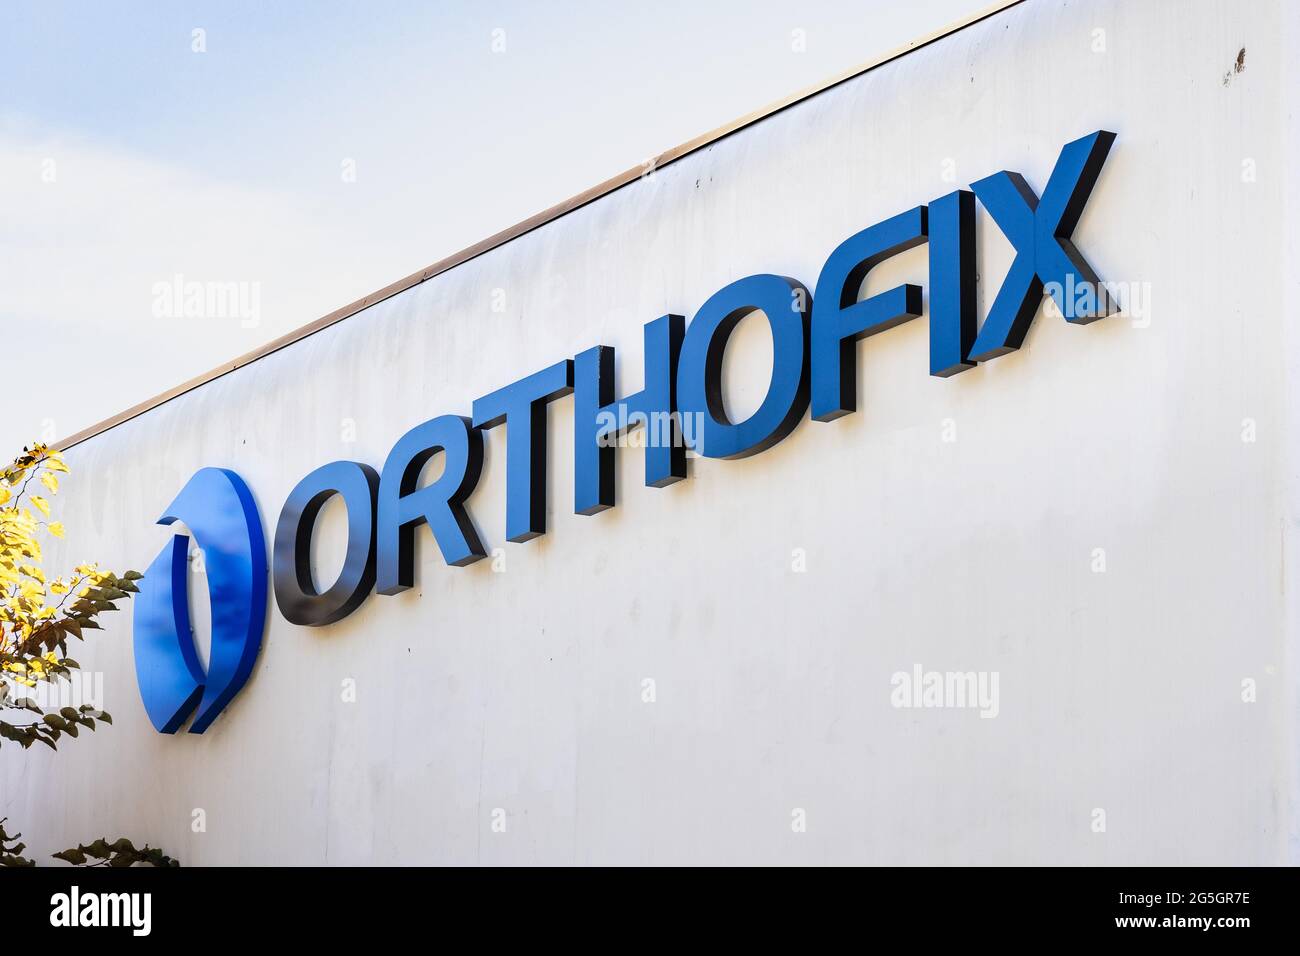 Sep 26, 2020 Santa Clara / CA / USA - Orthofix logo at their headquarters in Silicon Valley; Orthofix Medical Inc. operates as a medical device and bi Stock Photo